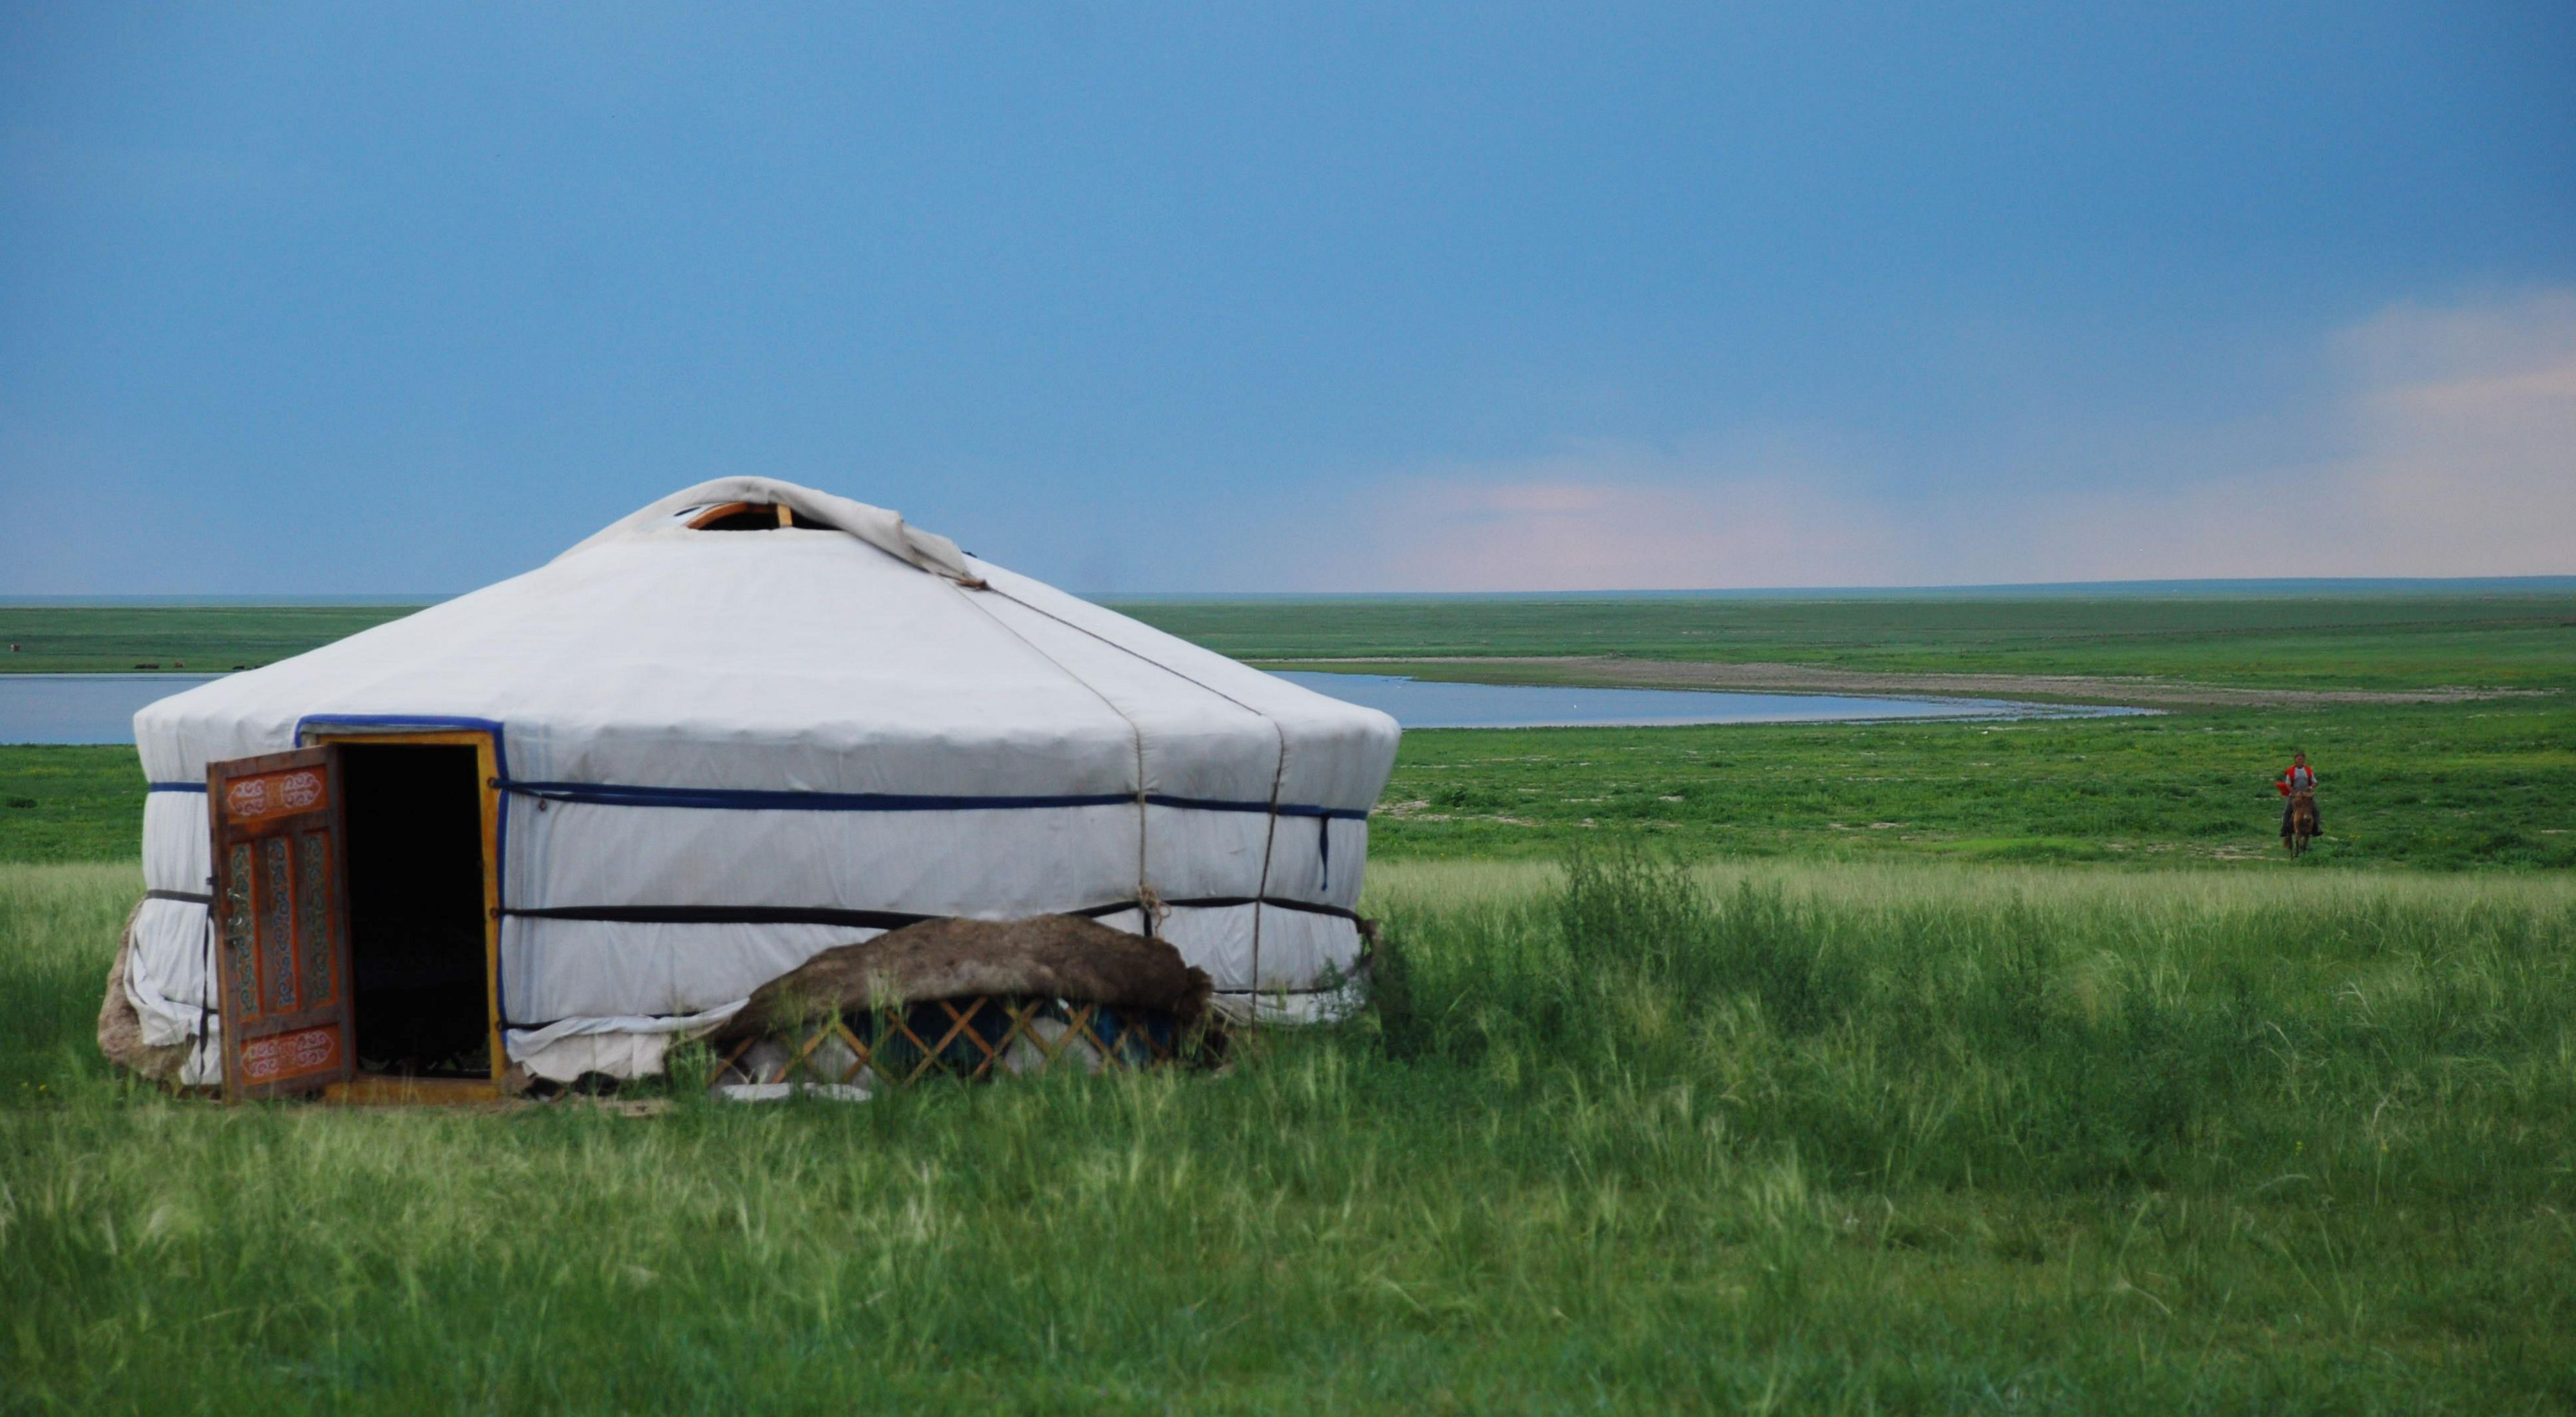 Yurts, called gers in Mongolia, are traditionally used by nomads on the steppes of Central Asia.